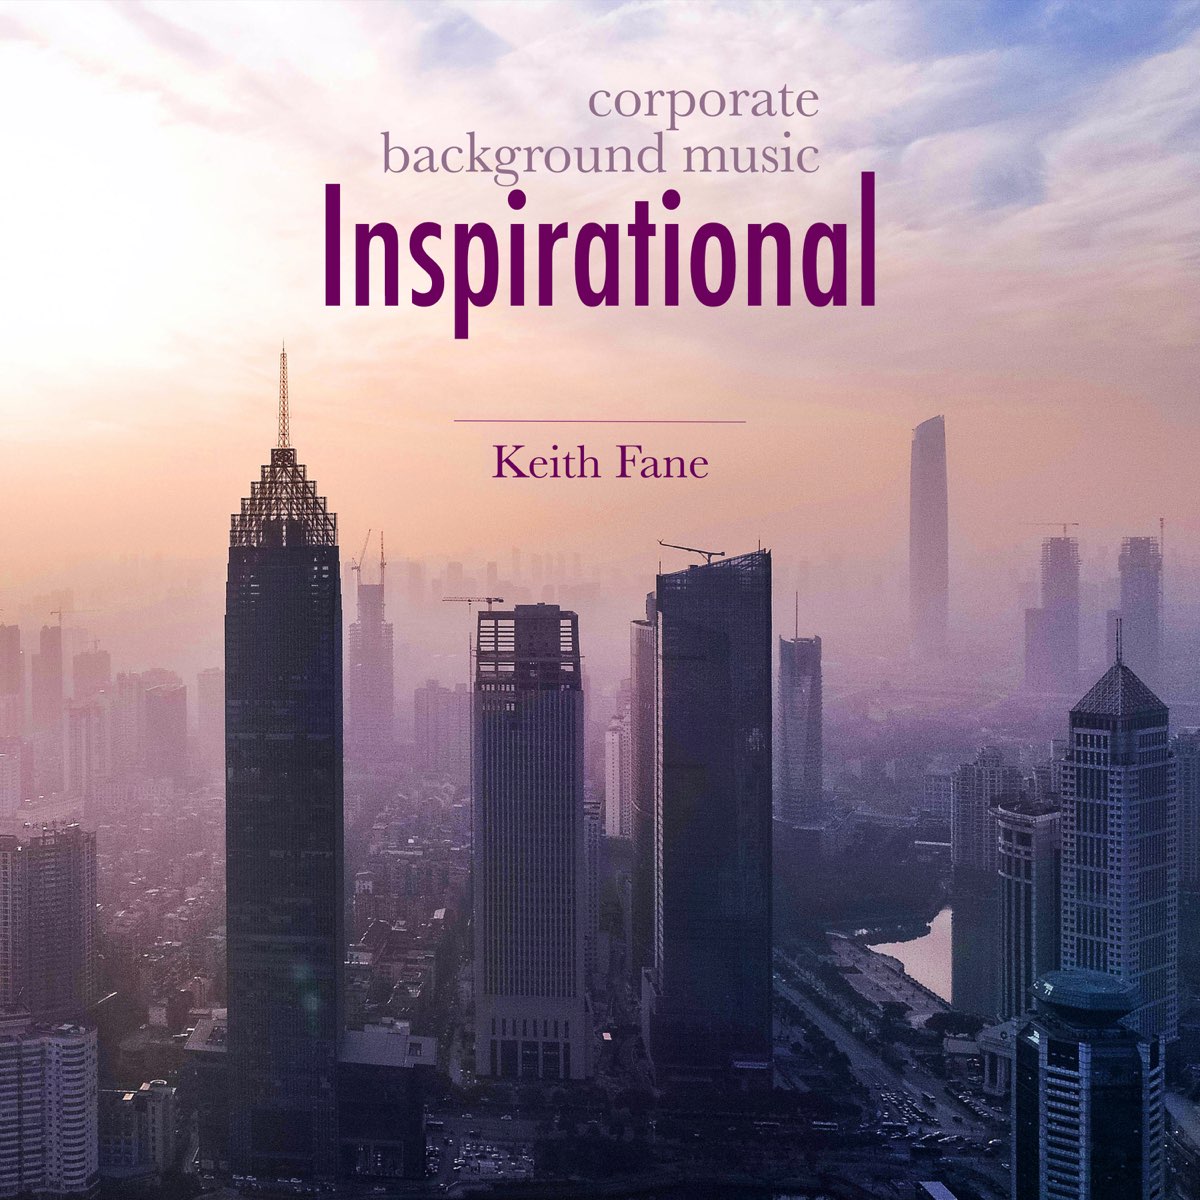 Inspirational Corporate - Background Music for Advertising by Keith Fane on  Apple Music